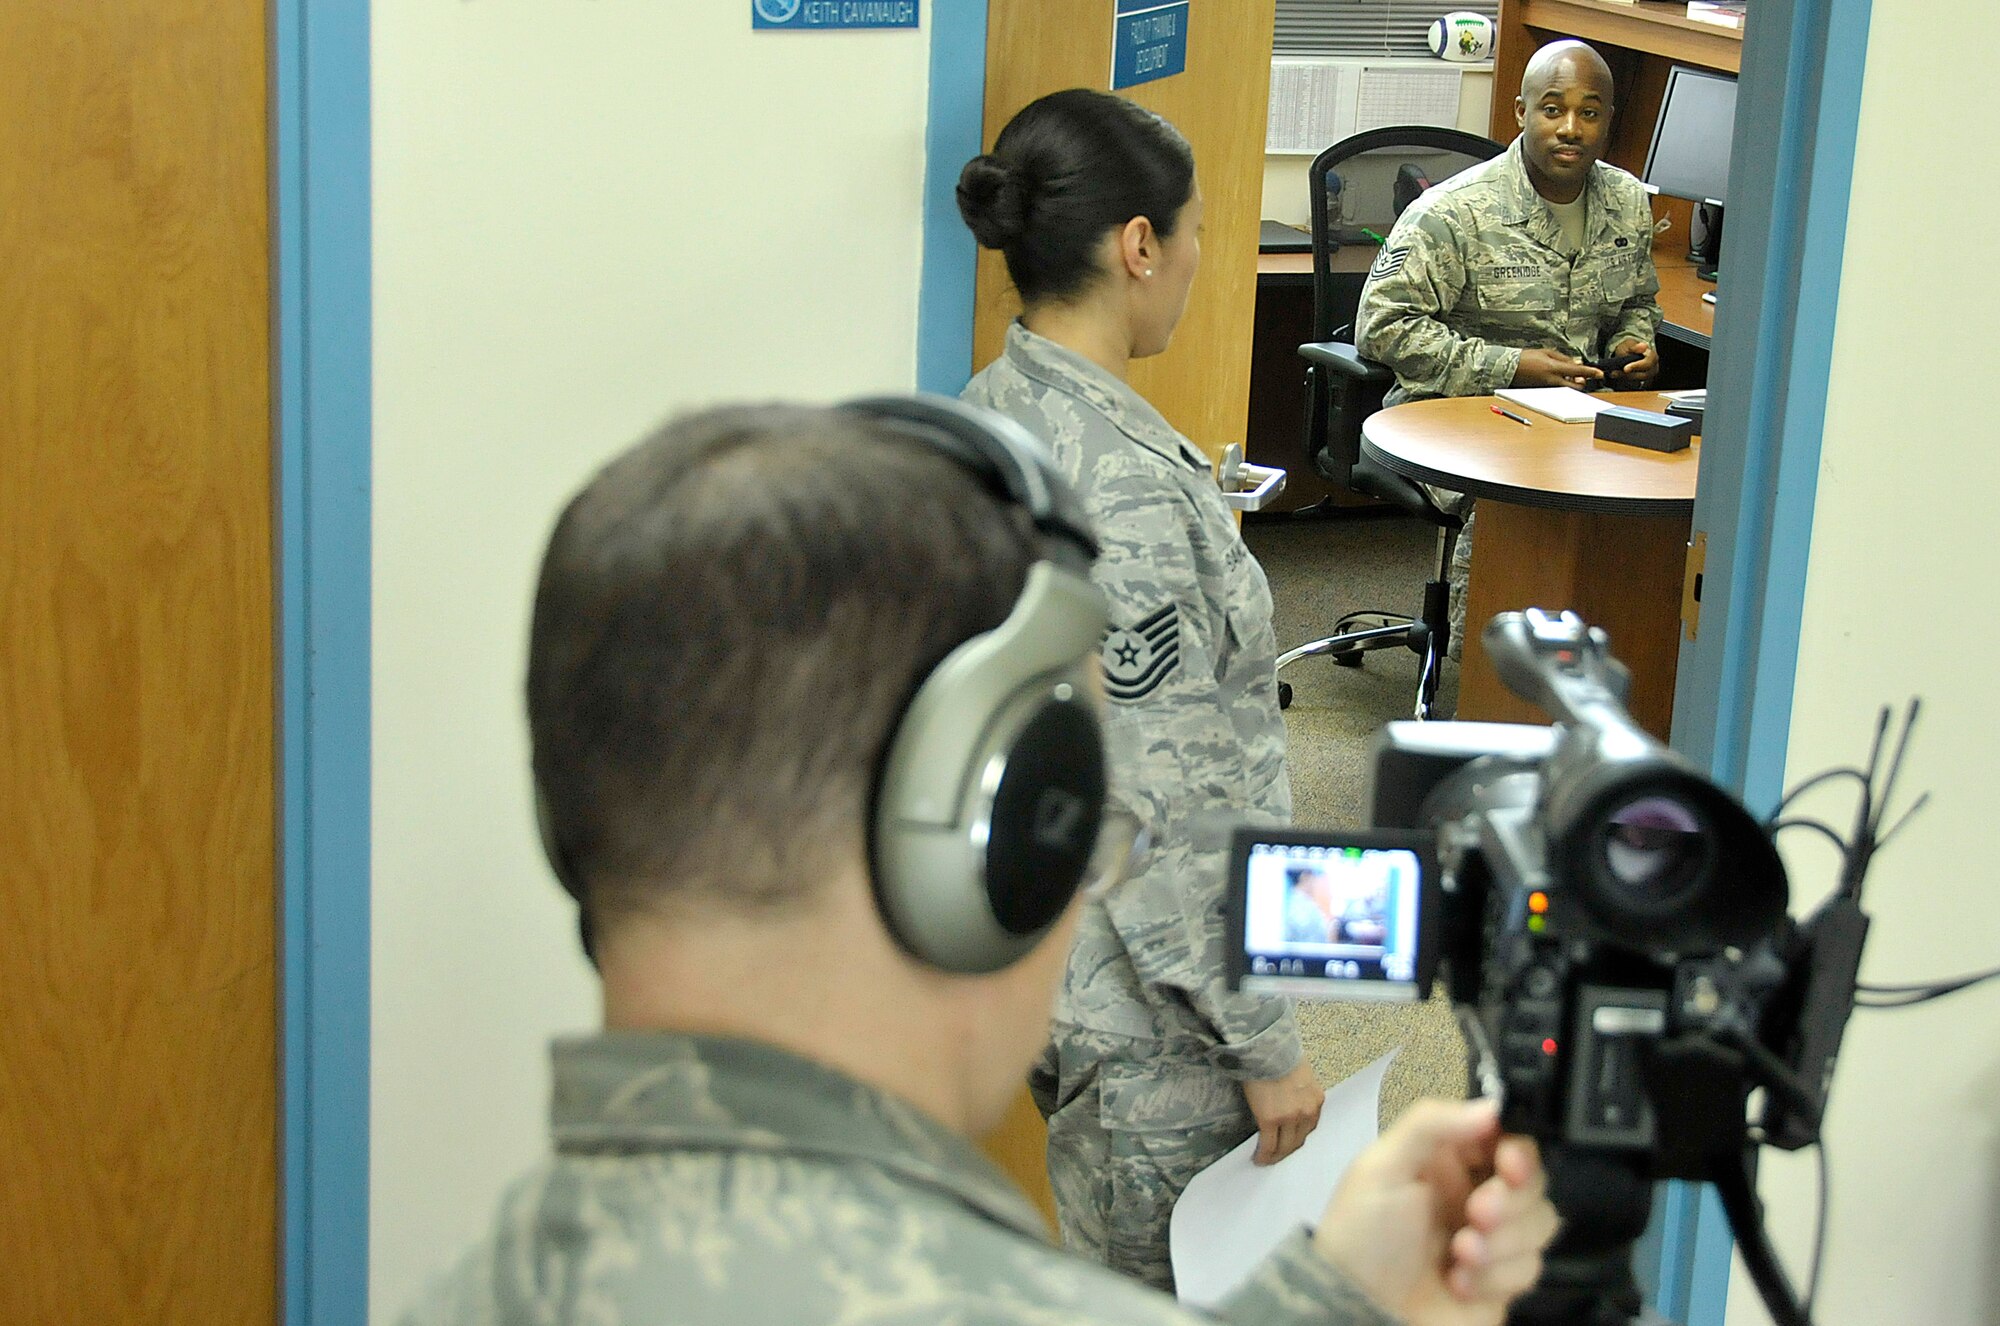 MCGHEE TYSON AIR NATIONAL GUARD BASE, Tenn. – Air National Guard Tech. Sgt. Matt Schwartz, broadcaster at the I. G. Brown Training and Education Center here directs Tech. Sgt. Jenny Sanchez and Tech. Sgt. Kasimu Greenidge while filming a training video on enlisted performance reports. The Center produced the video to help train Air National Guard members on EPR writing. (U.S. Air National Guard photo by Master Sgt. Mike R. Smith/Released)